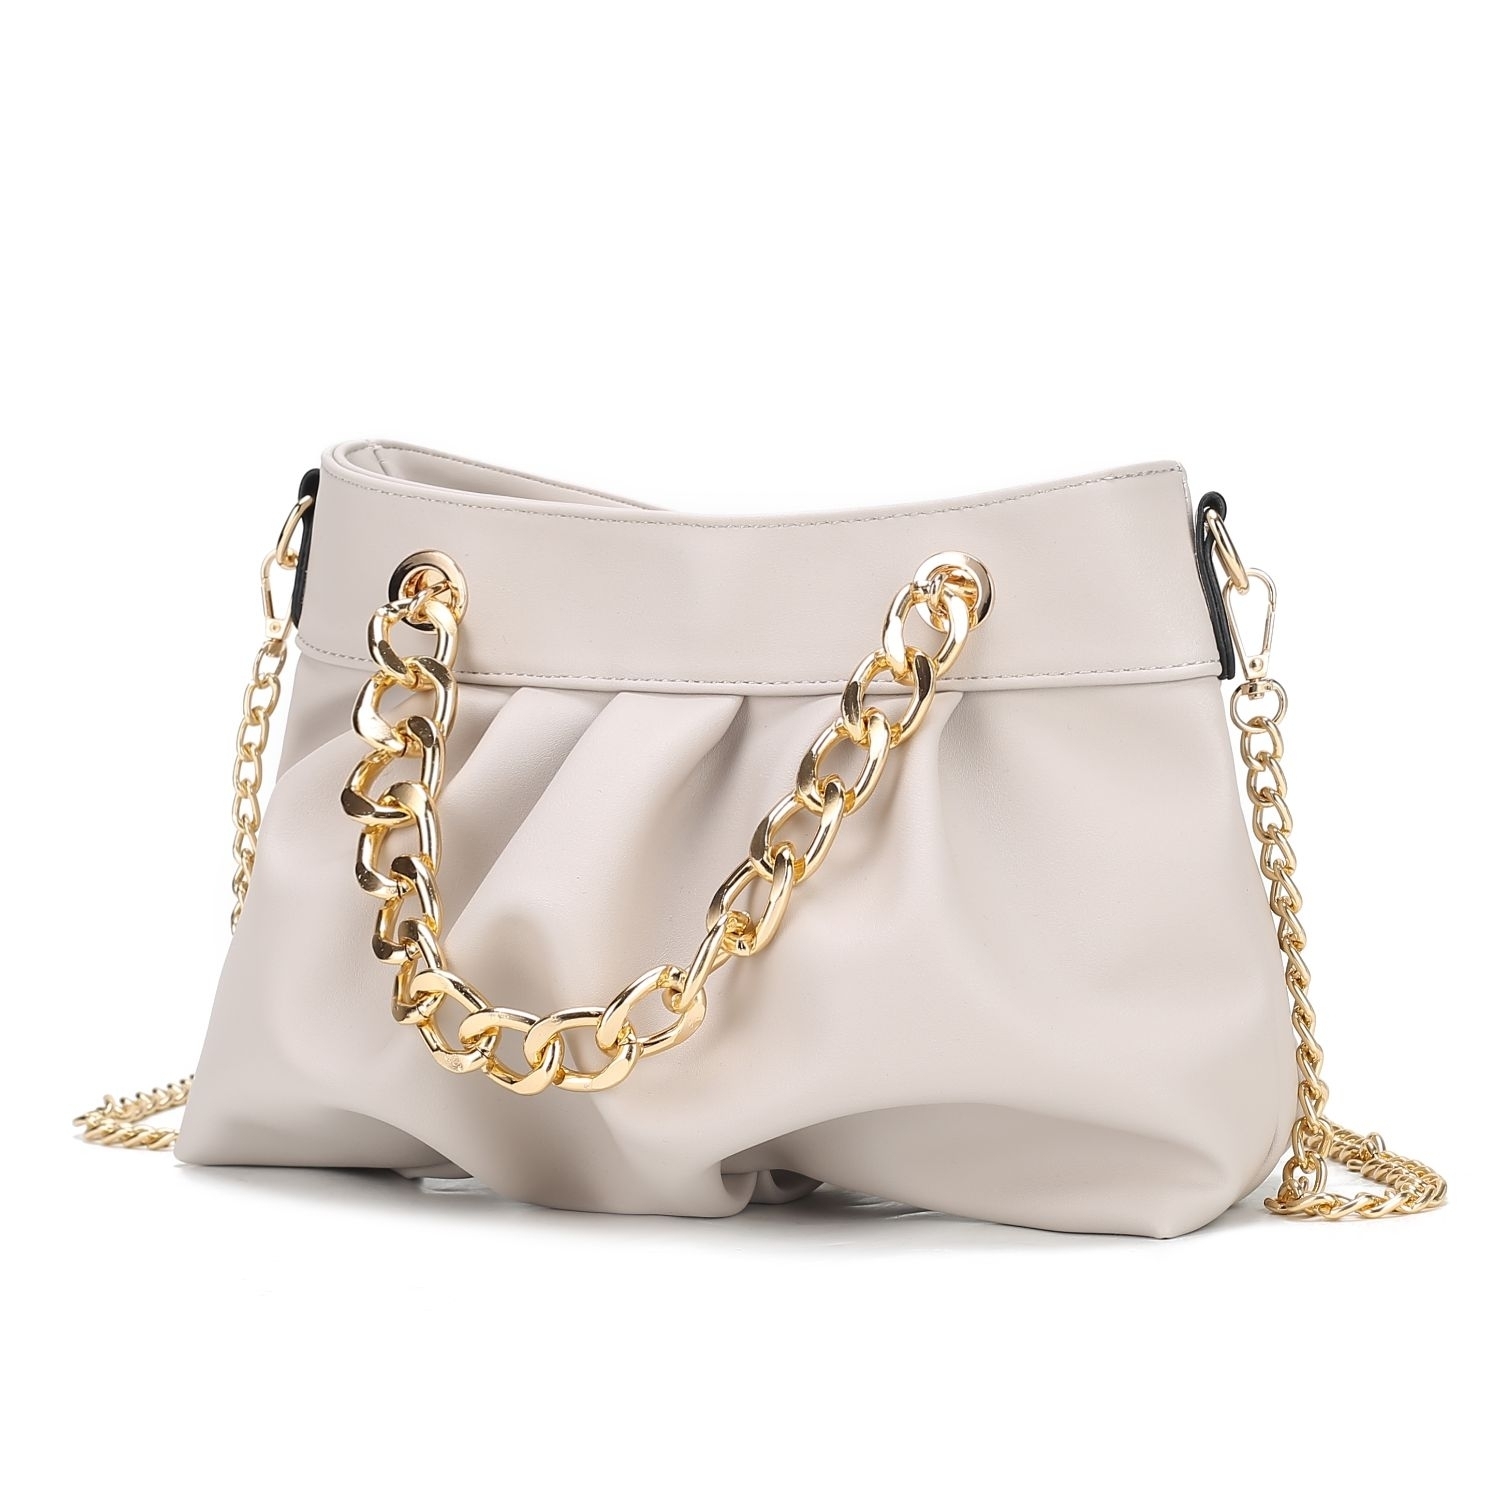 MKF Collection Marvila Minimalist Vegan Leather Chain Ruched Shoulder Bag By Mia K - Blush